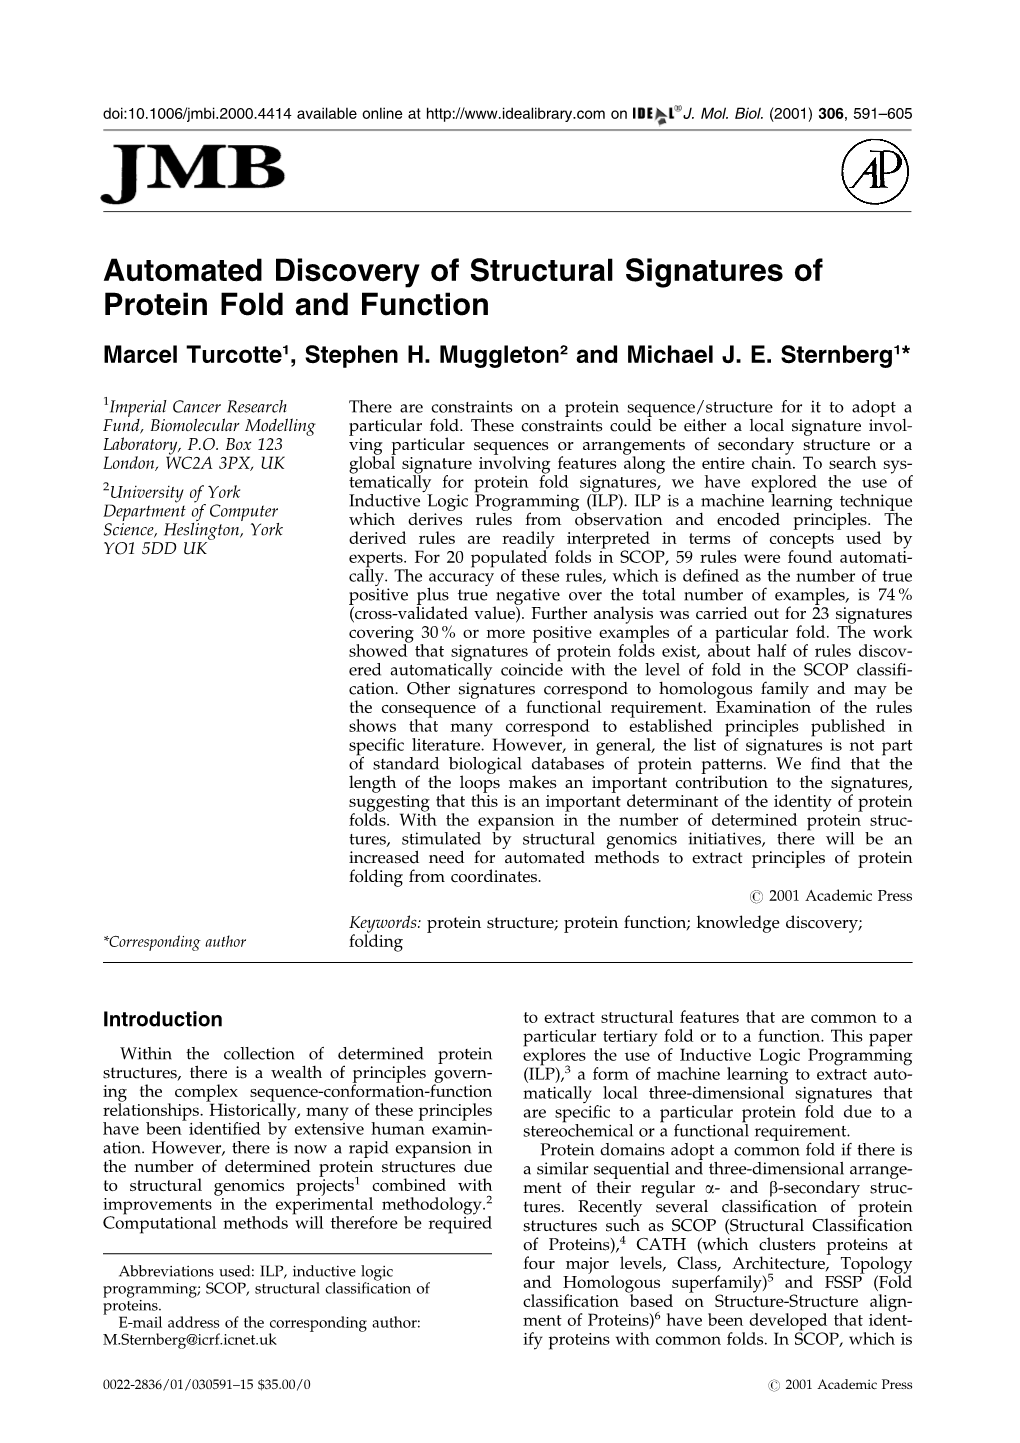 Automated Discovery of Structural Signatures of Protein Fold and Function